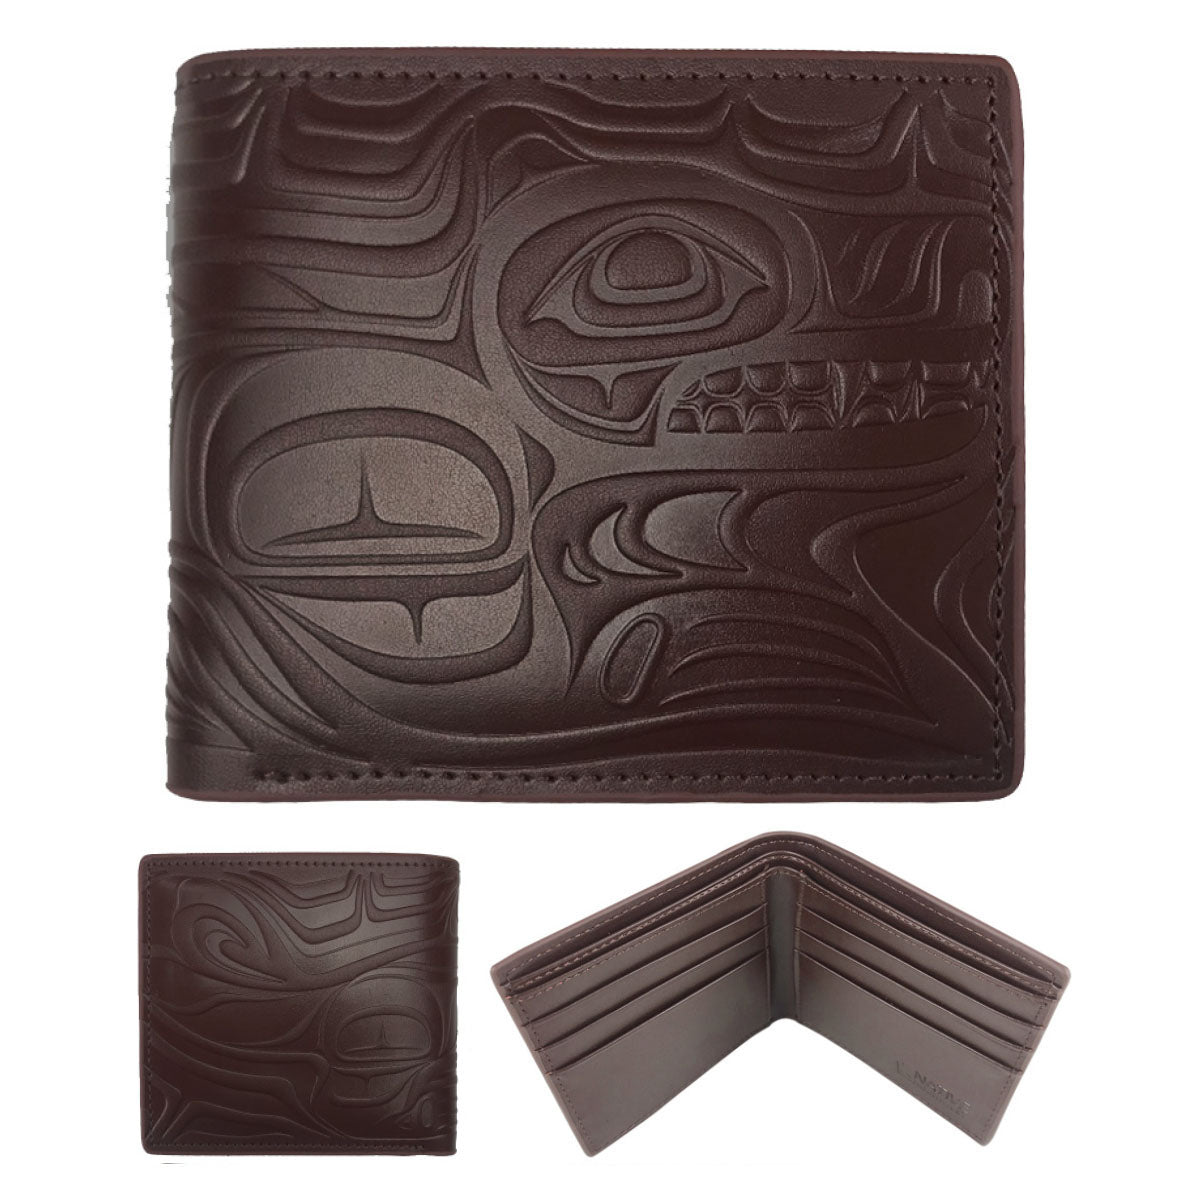 Leather Wallet Spirit Wolf - Leather Wallet Spirit Wolf -  - House of Himwitsa Native Art Gallery and Gifts